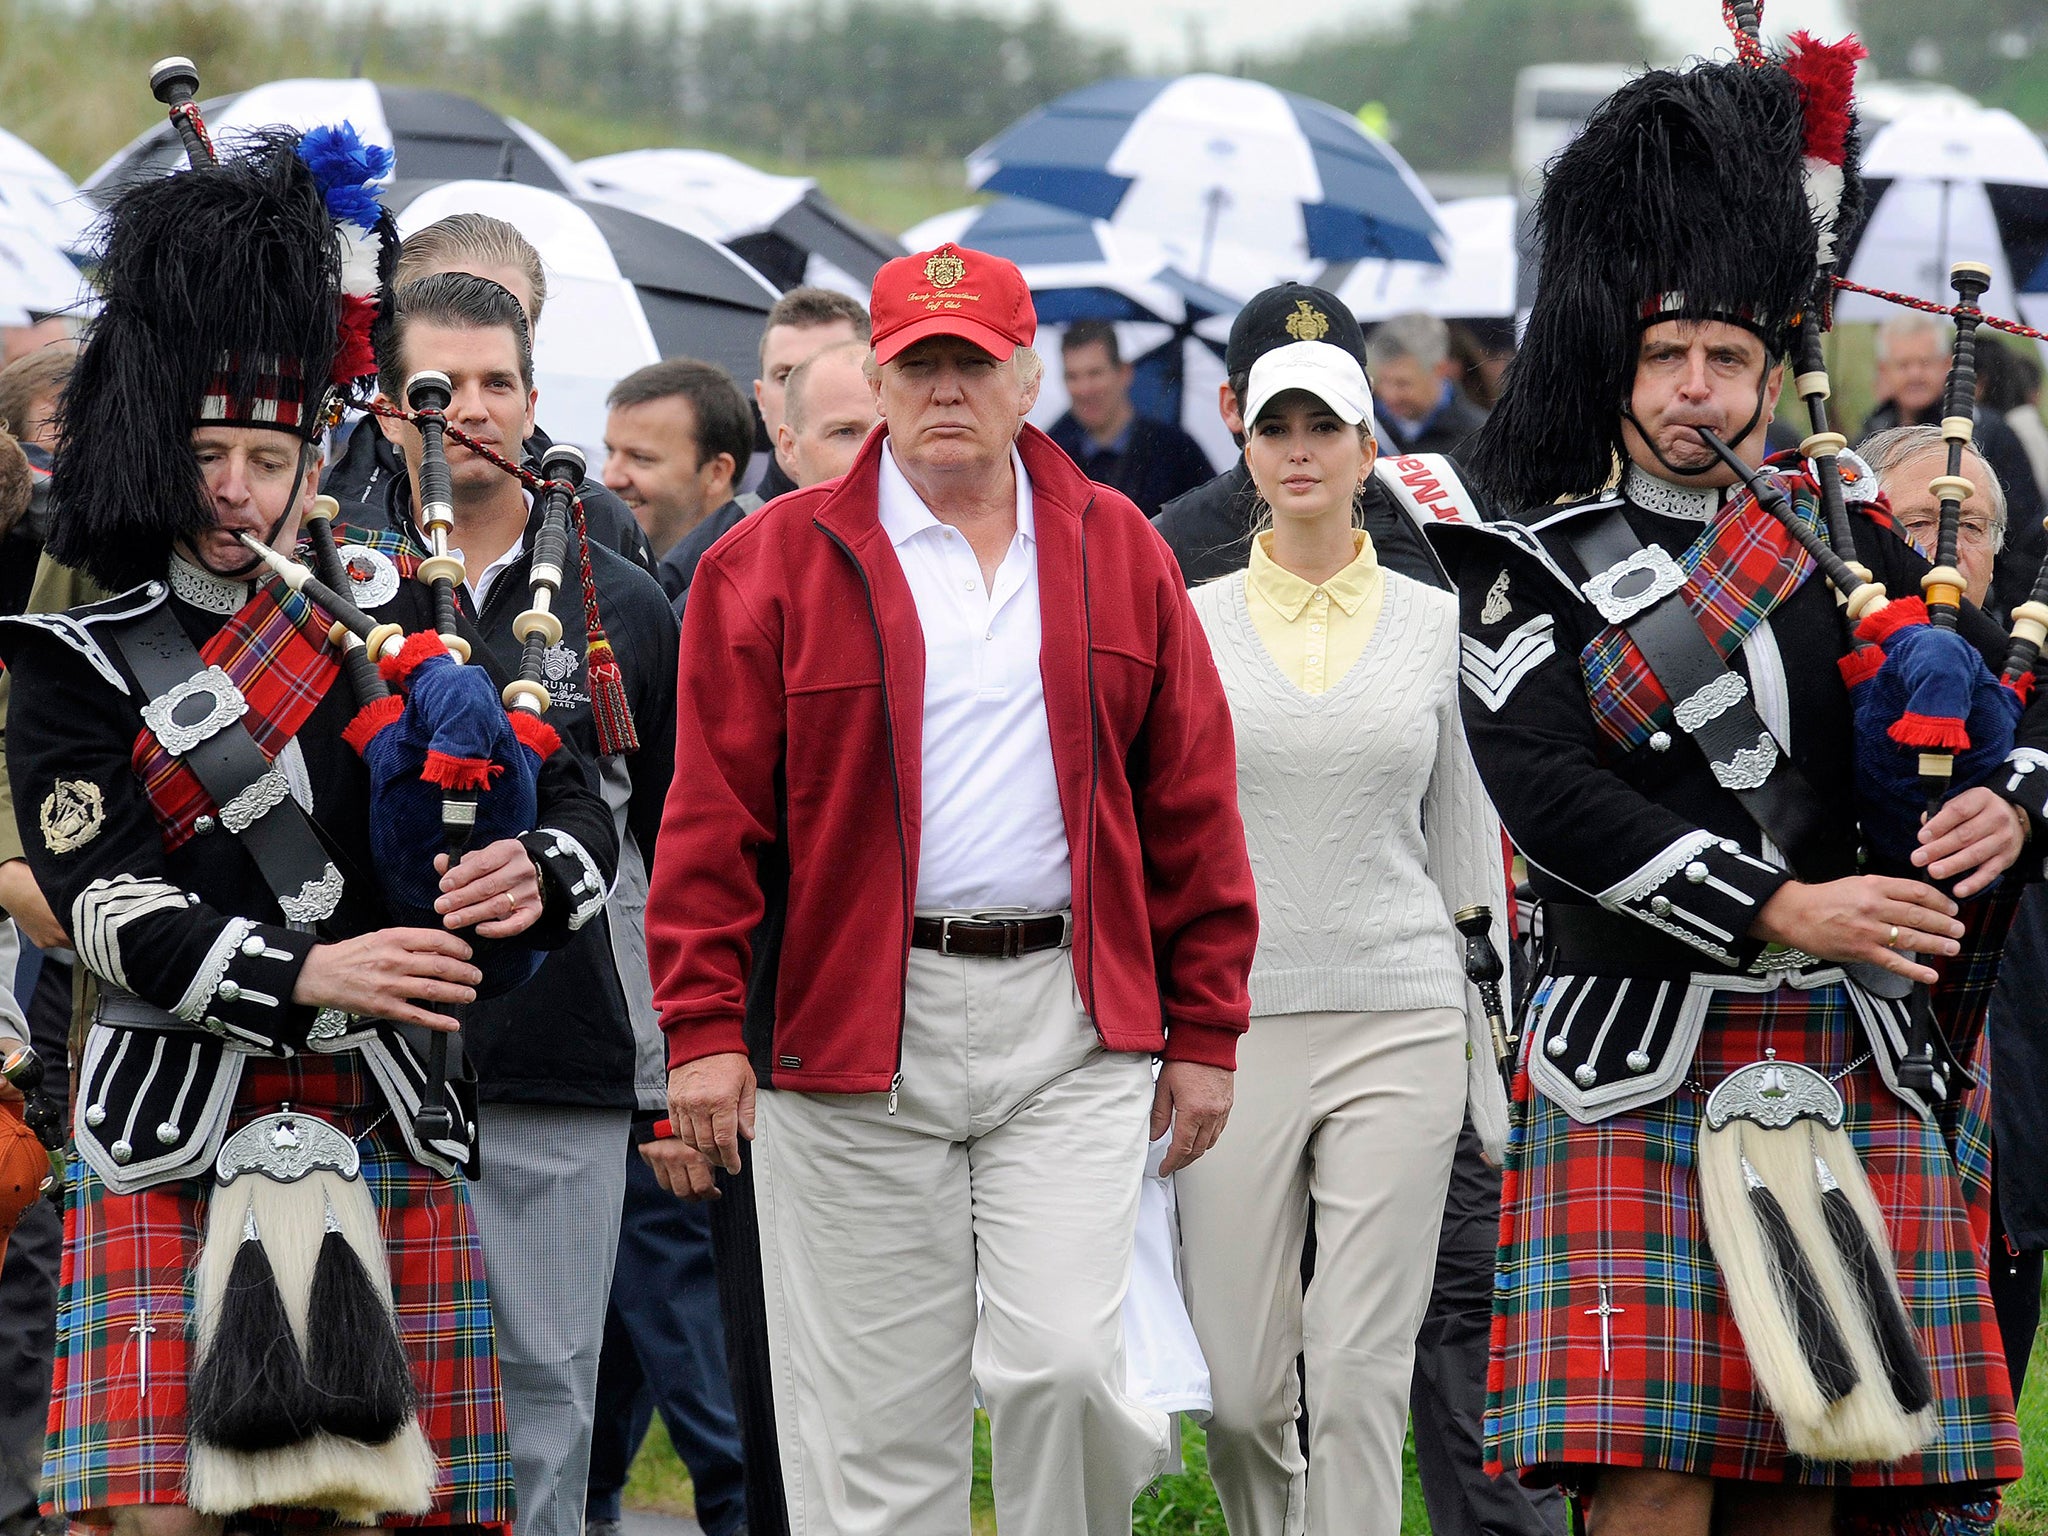 The US presidential hopeful owns several golf courses in the country